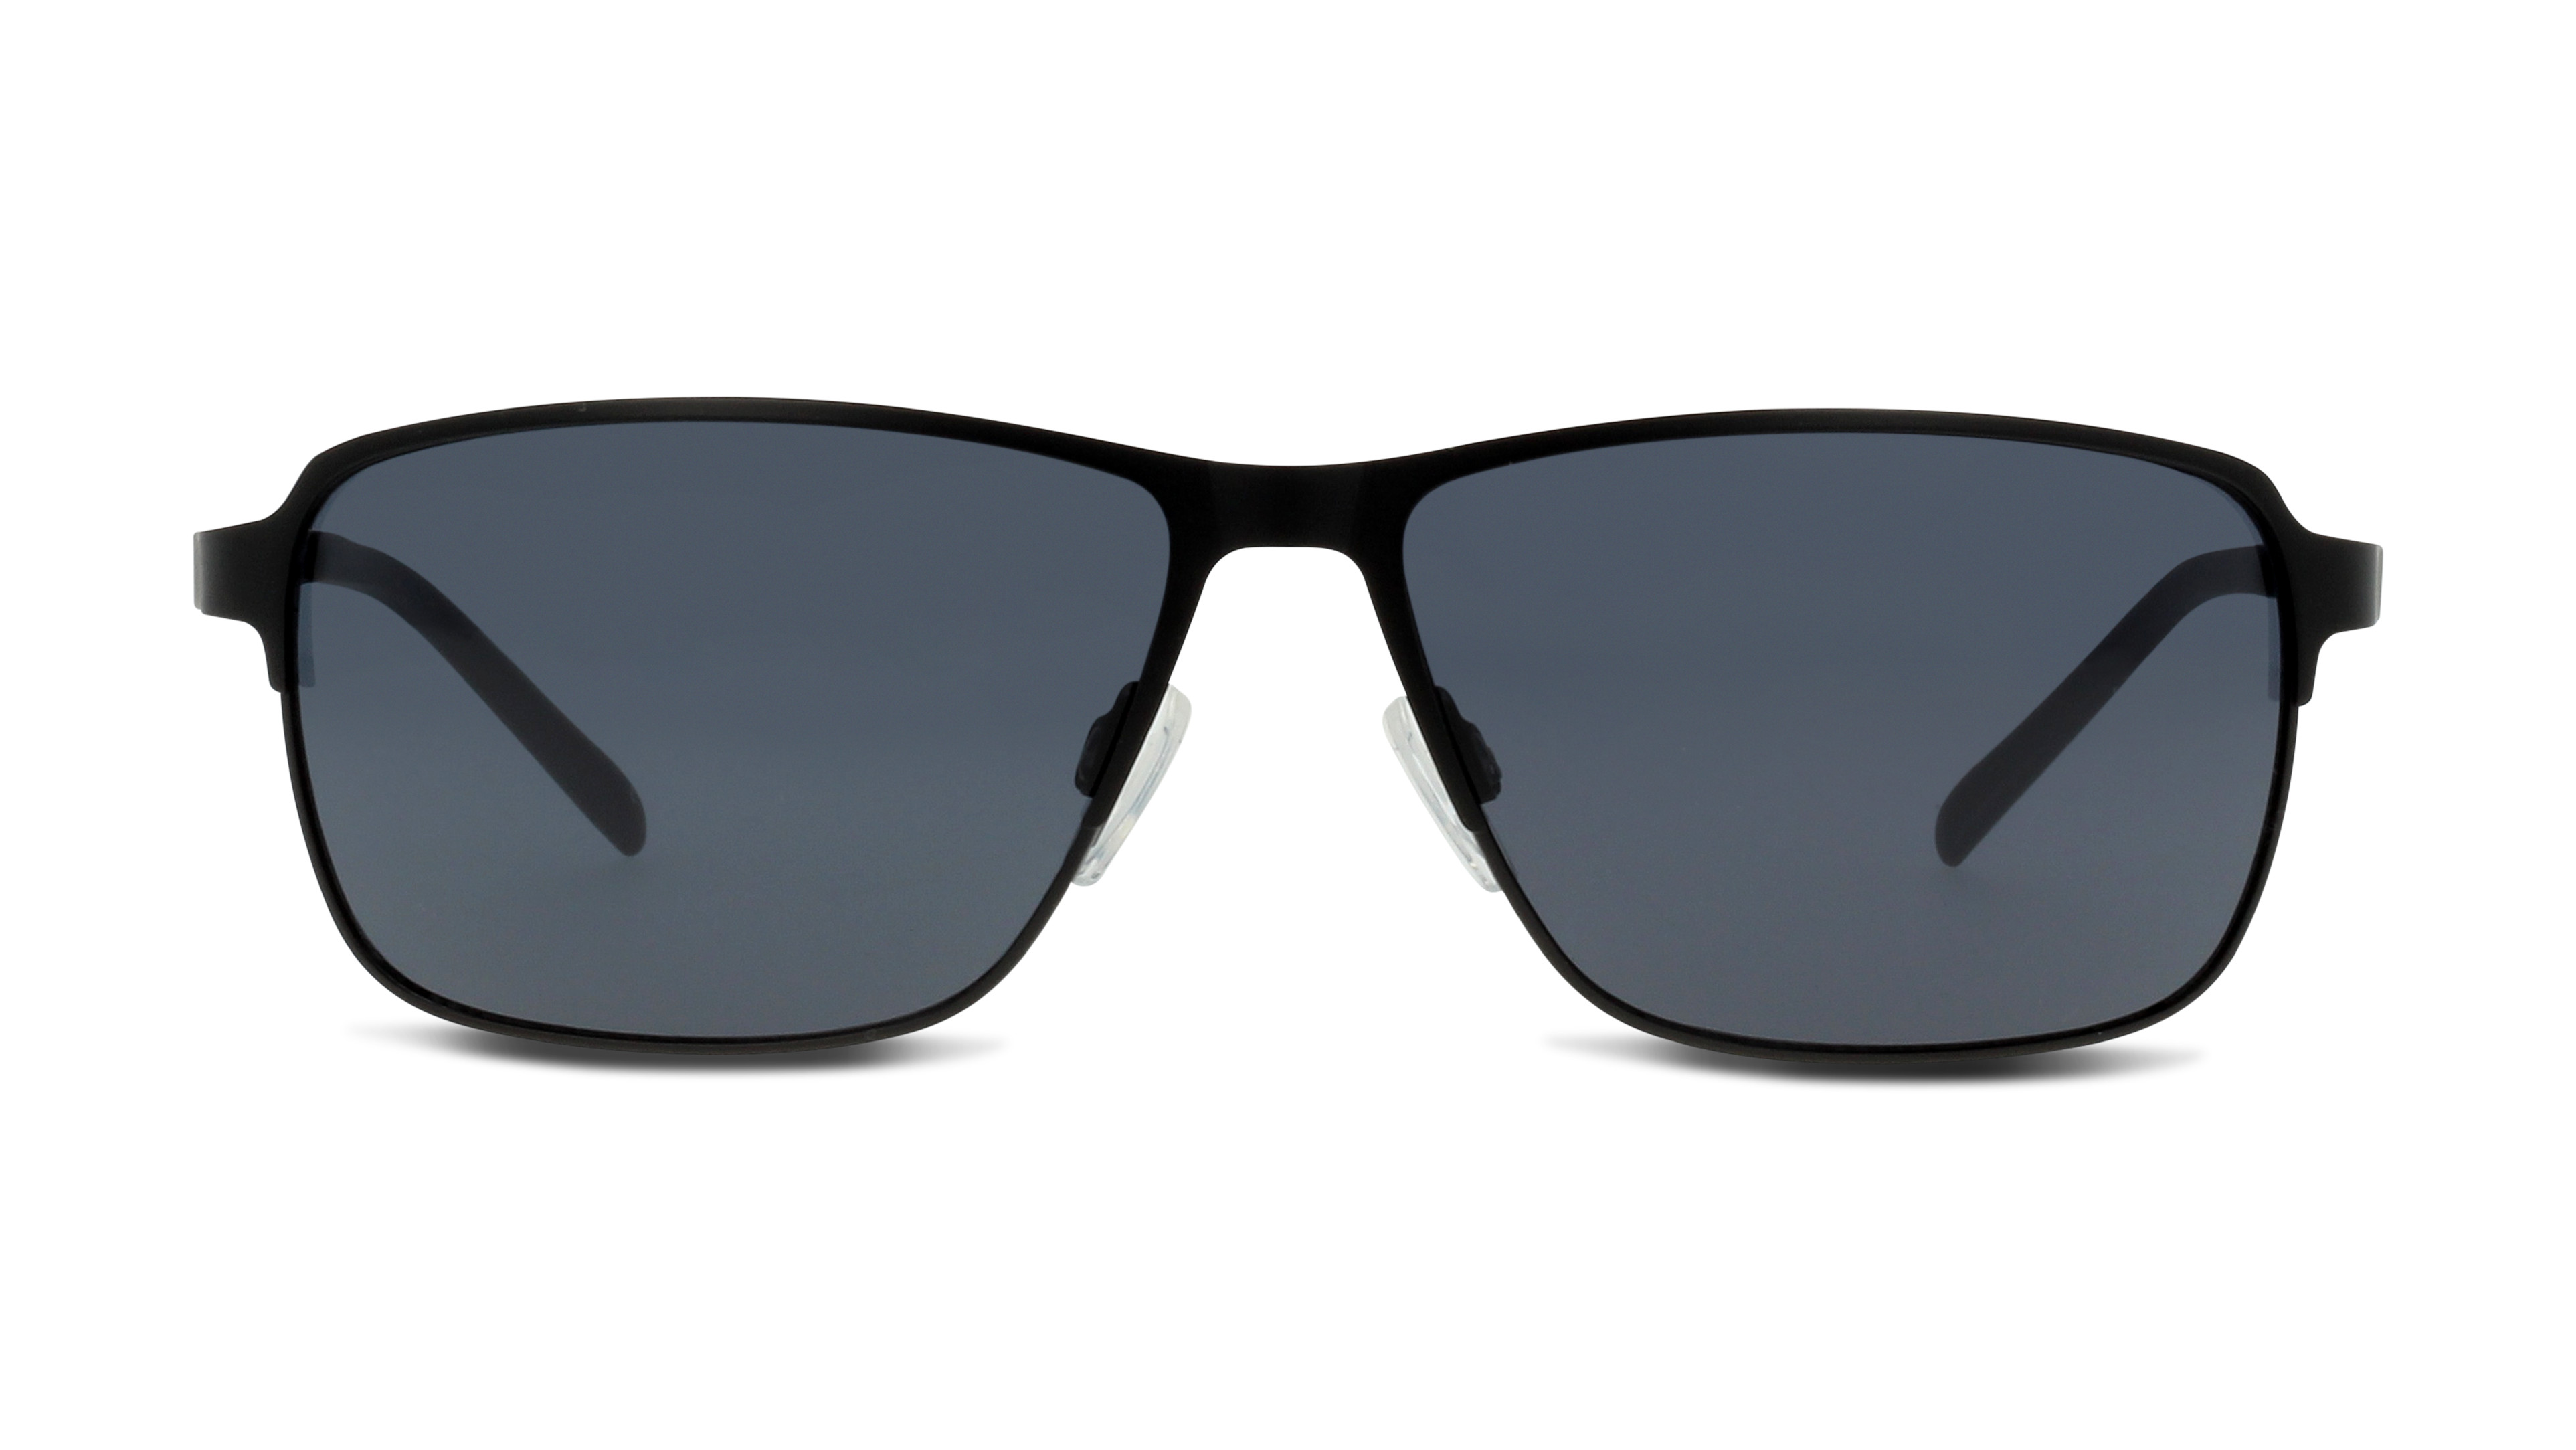 [products.image.front] HUMPHREY´S eyewear 585225 101030 Sonnenbrille